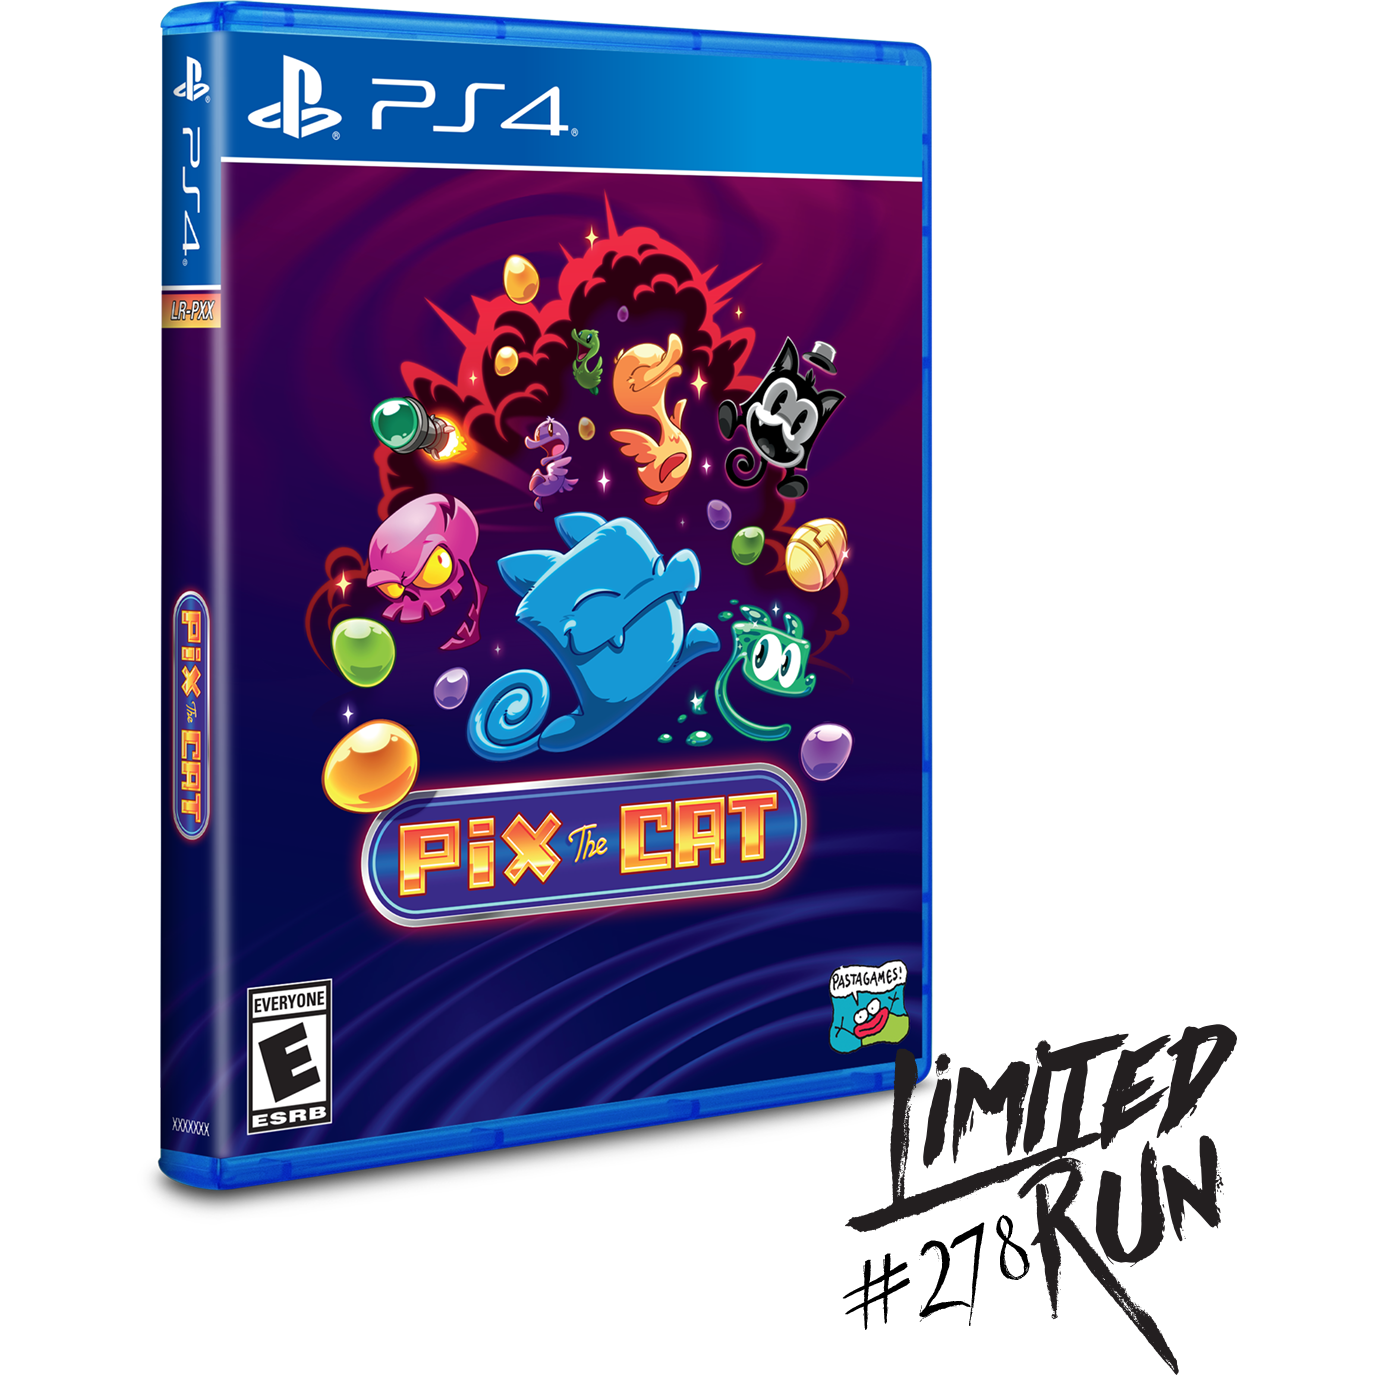 PS4 - Pix the Cat (Limited Run Games #278)